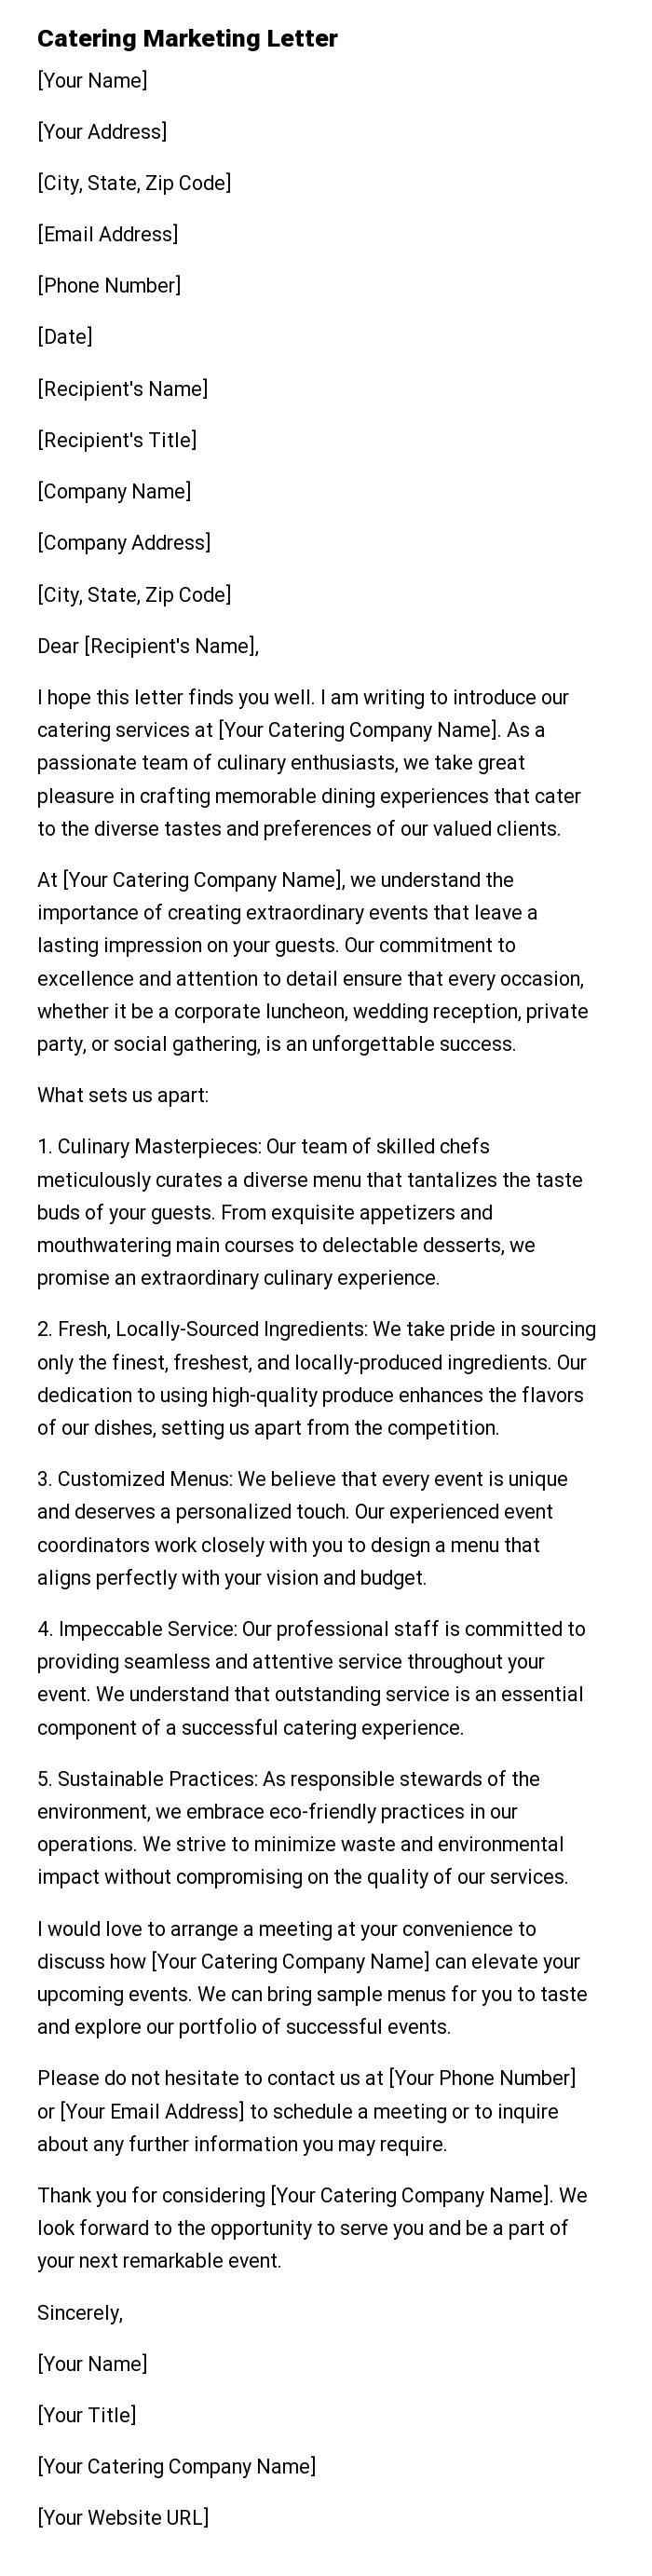 Catering Marketing Letter